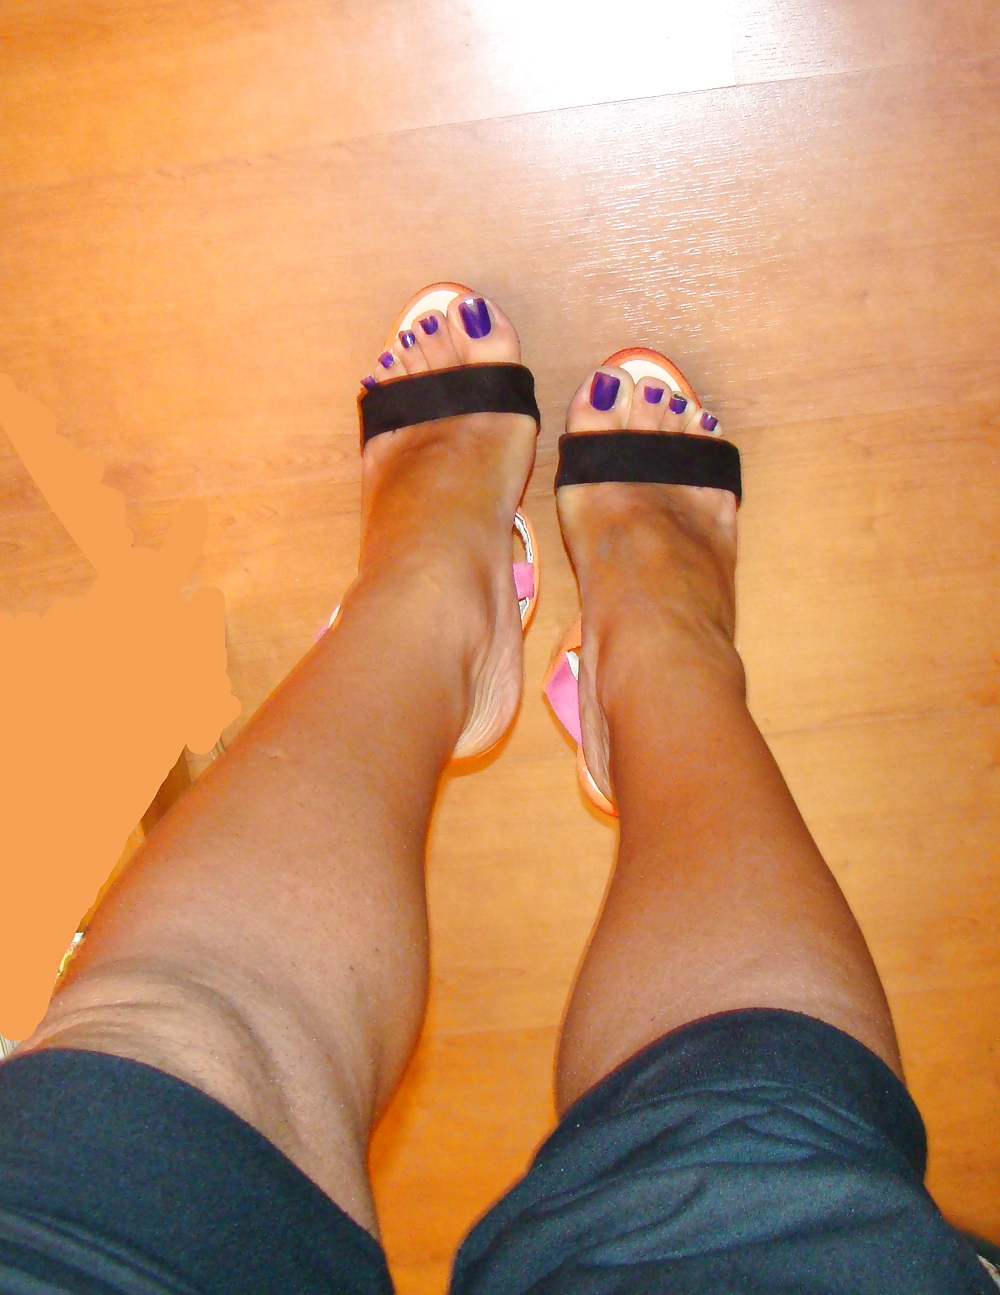 My new platforms and my nails painted #10775856